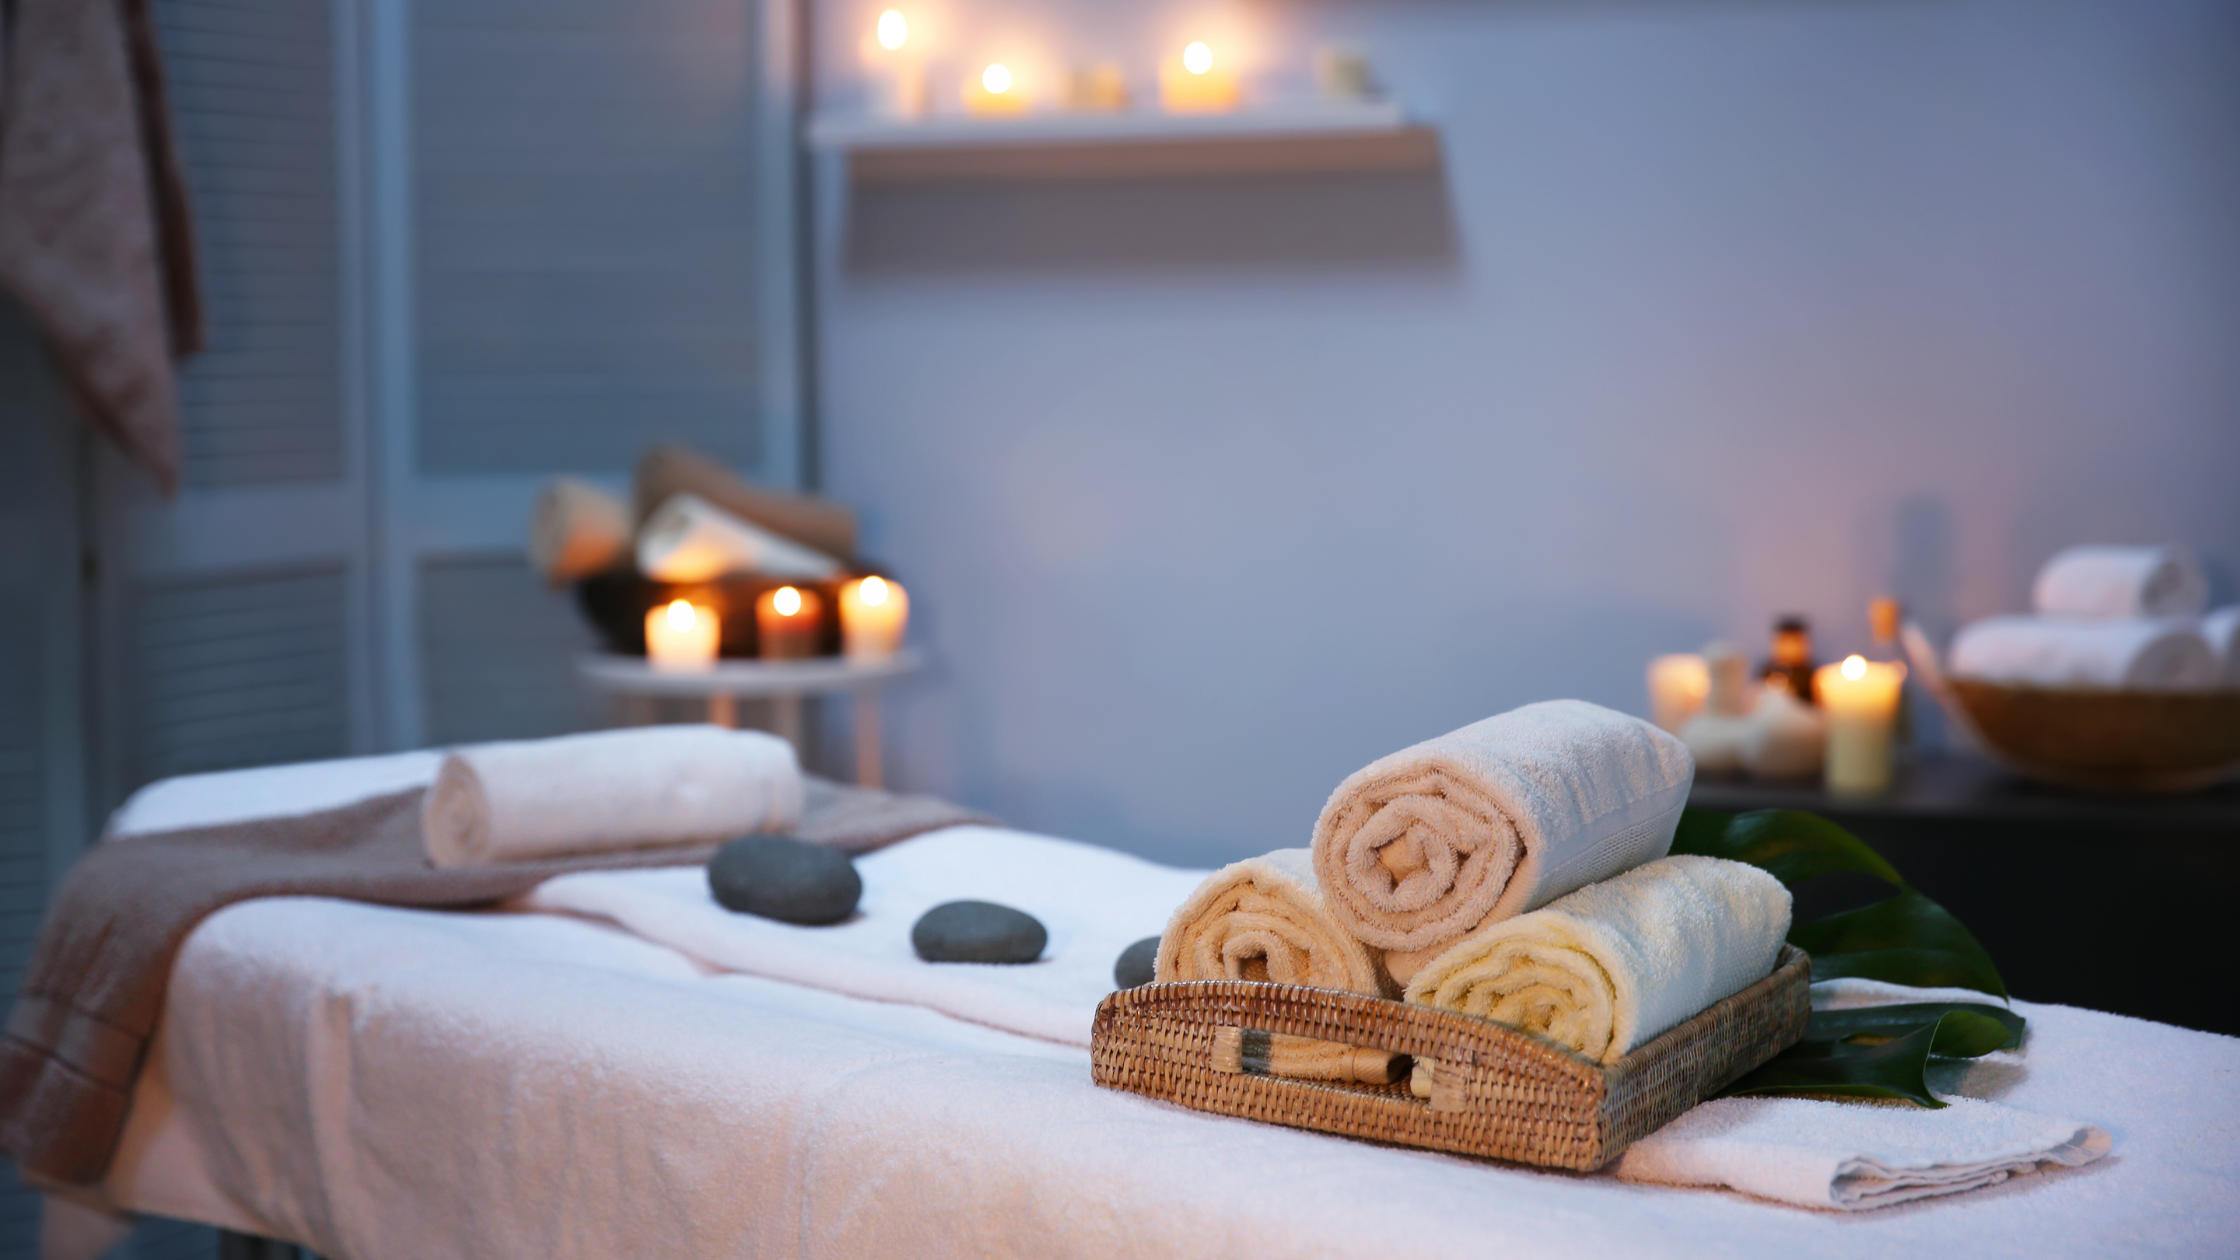 Spa setting with candles and essential oils